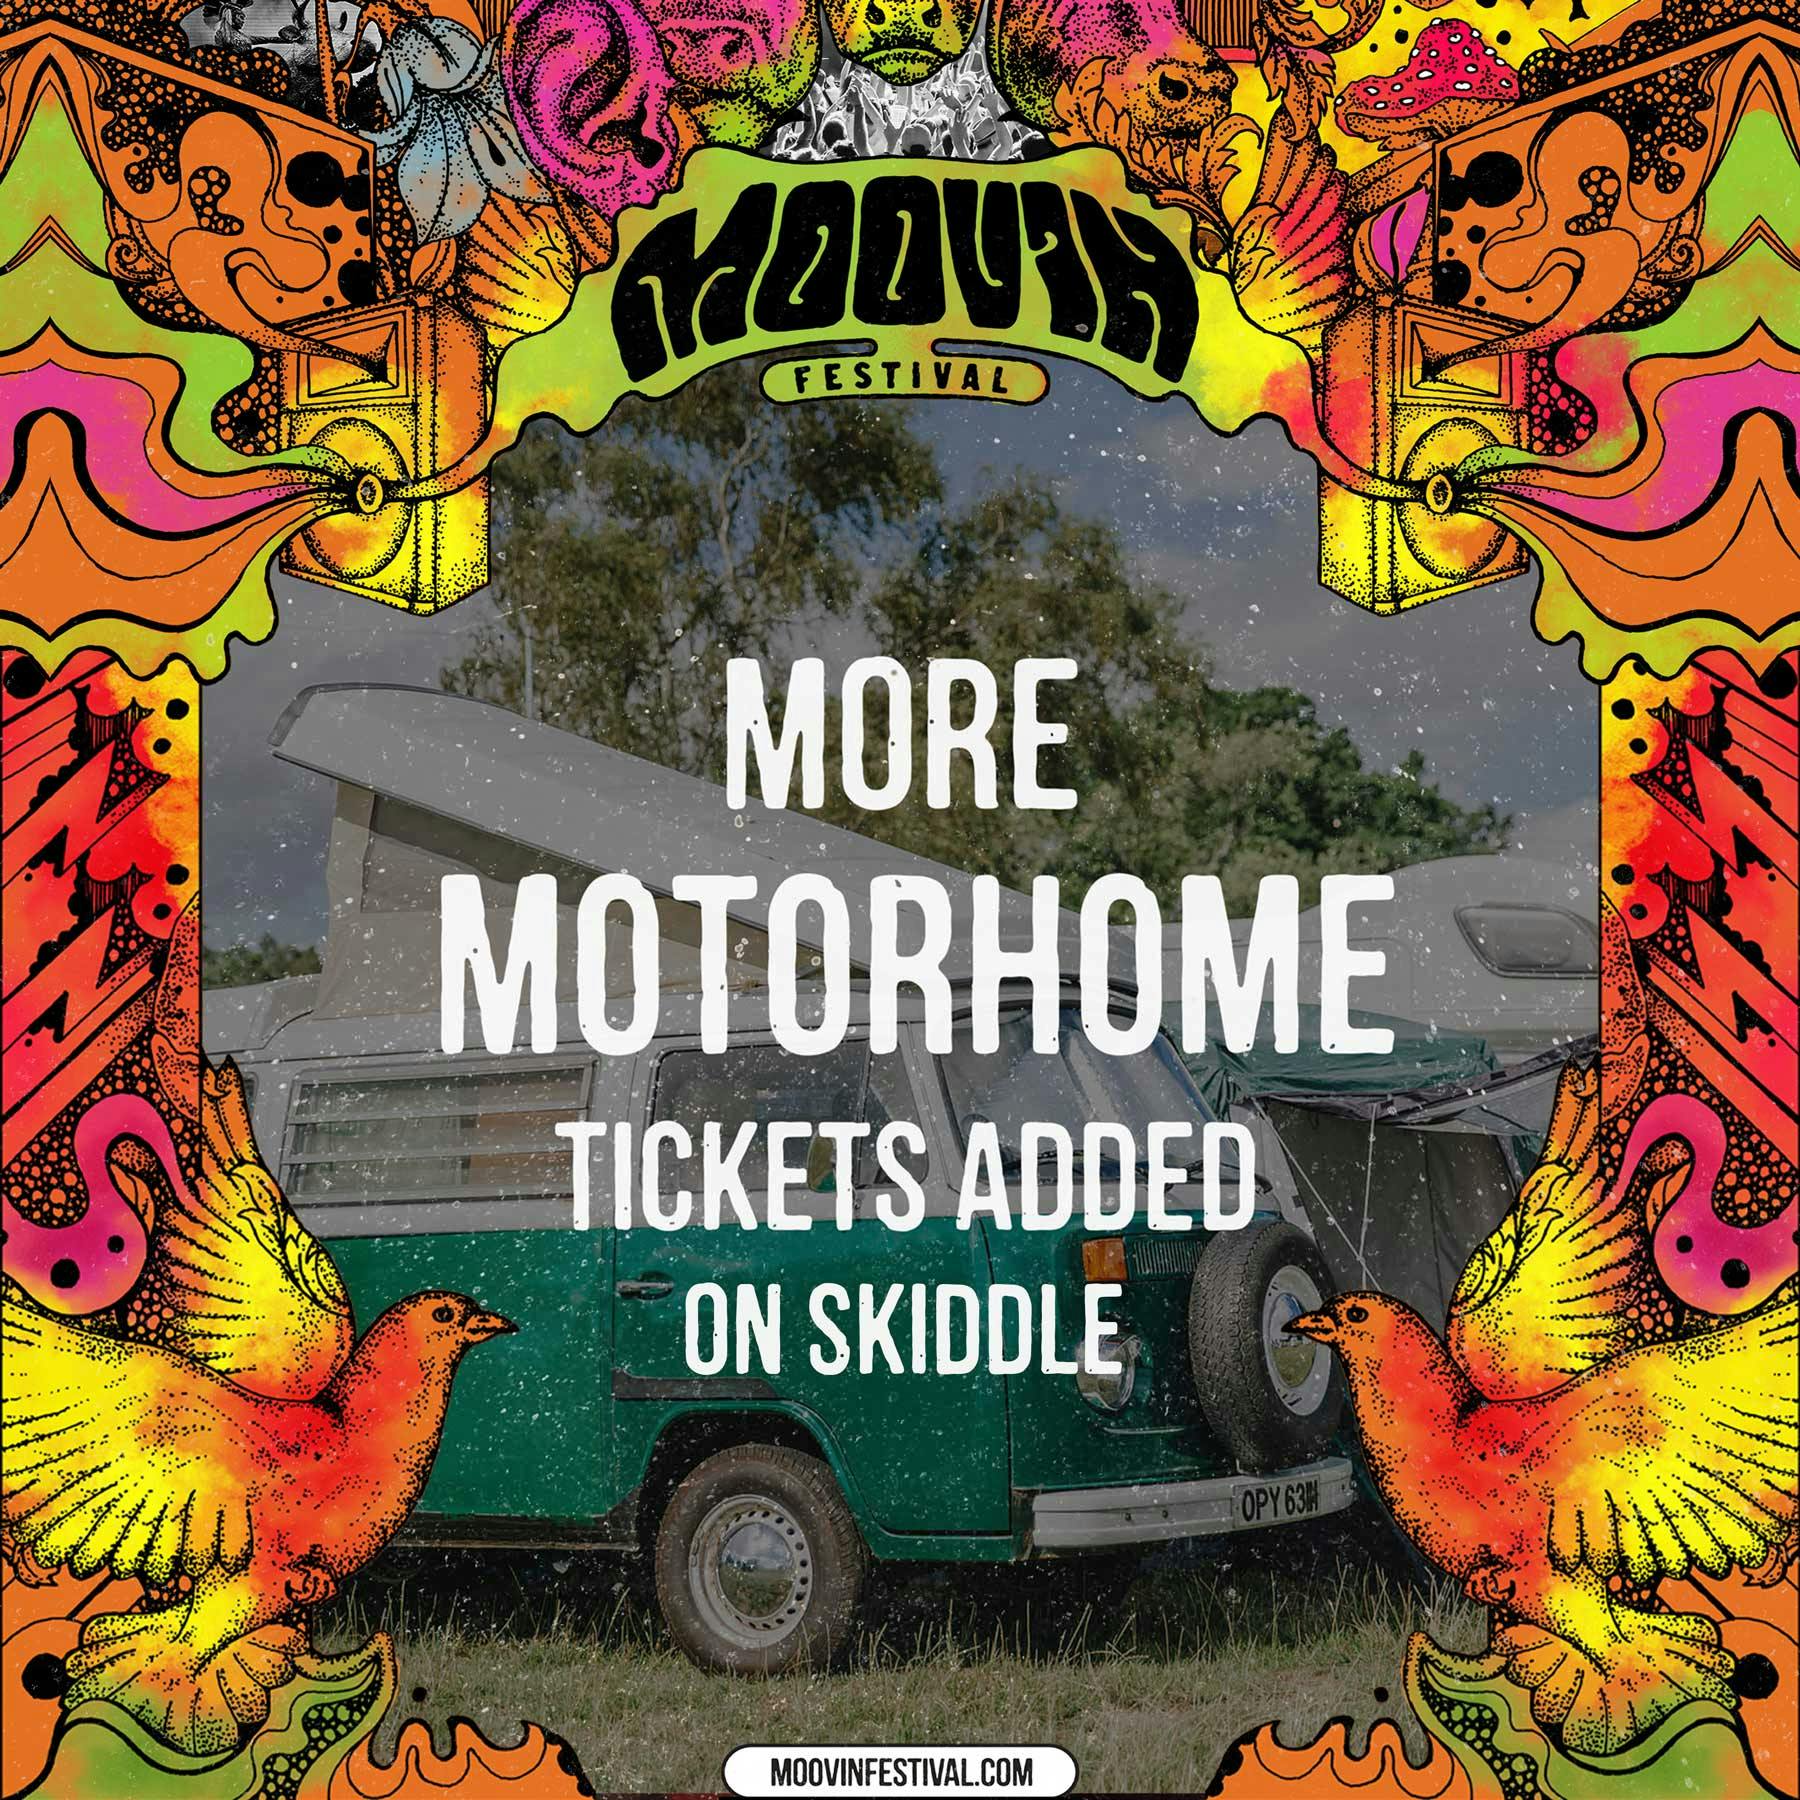 More Motorhome tickets added to Skiddle